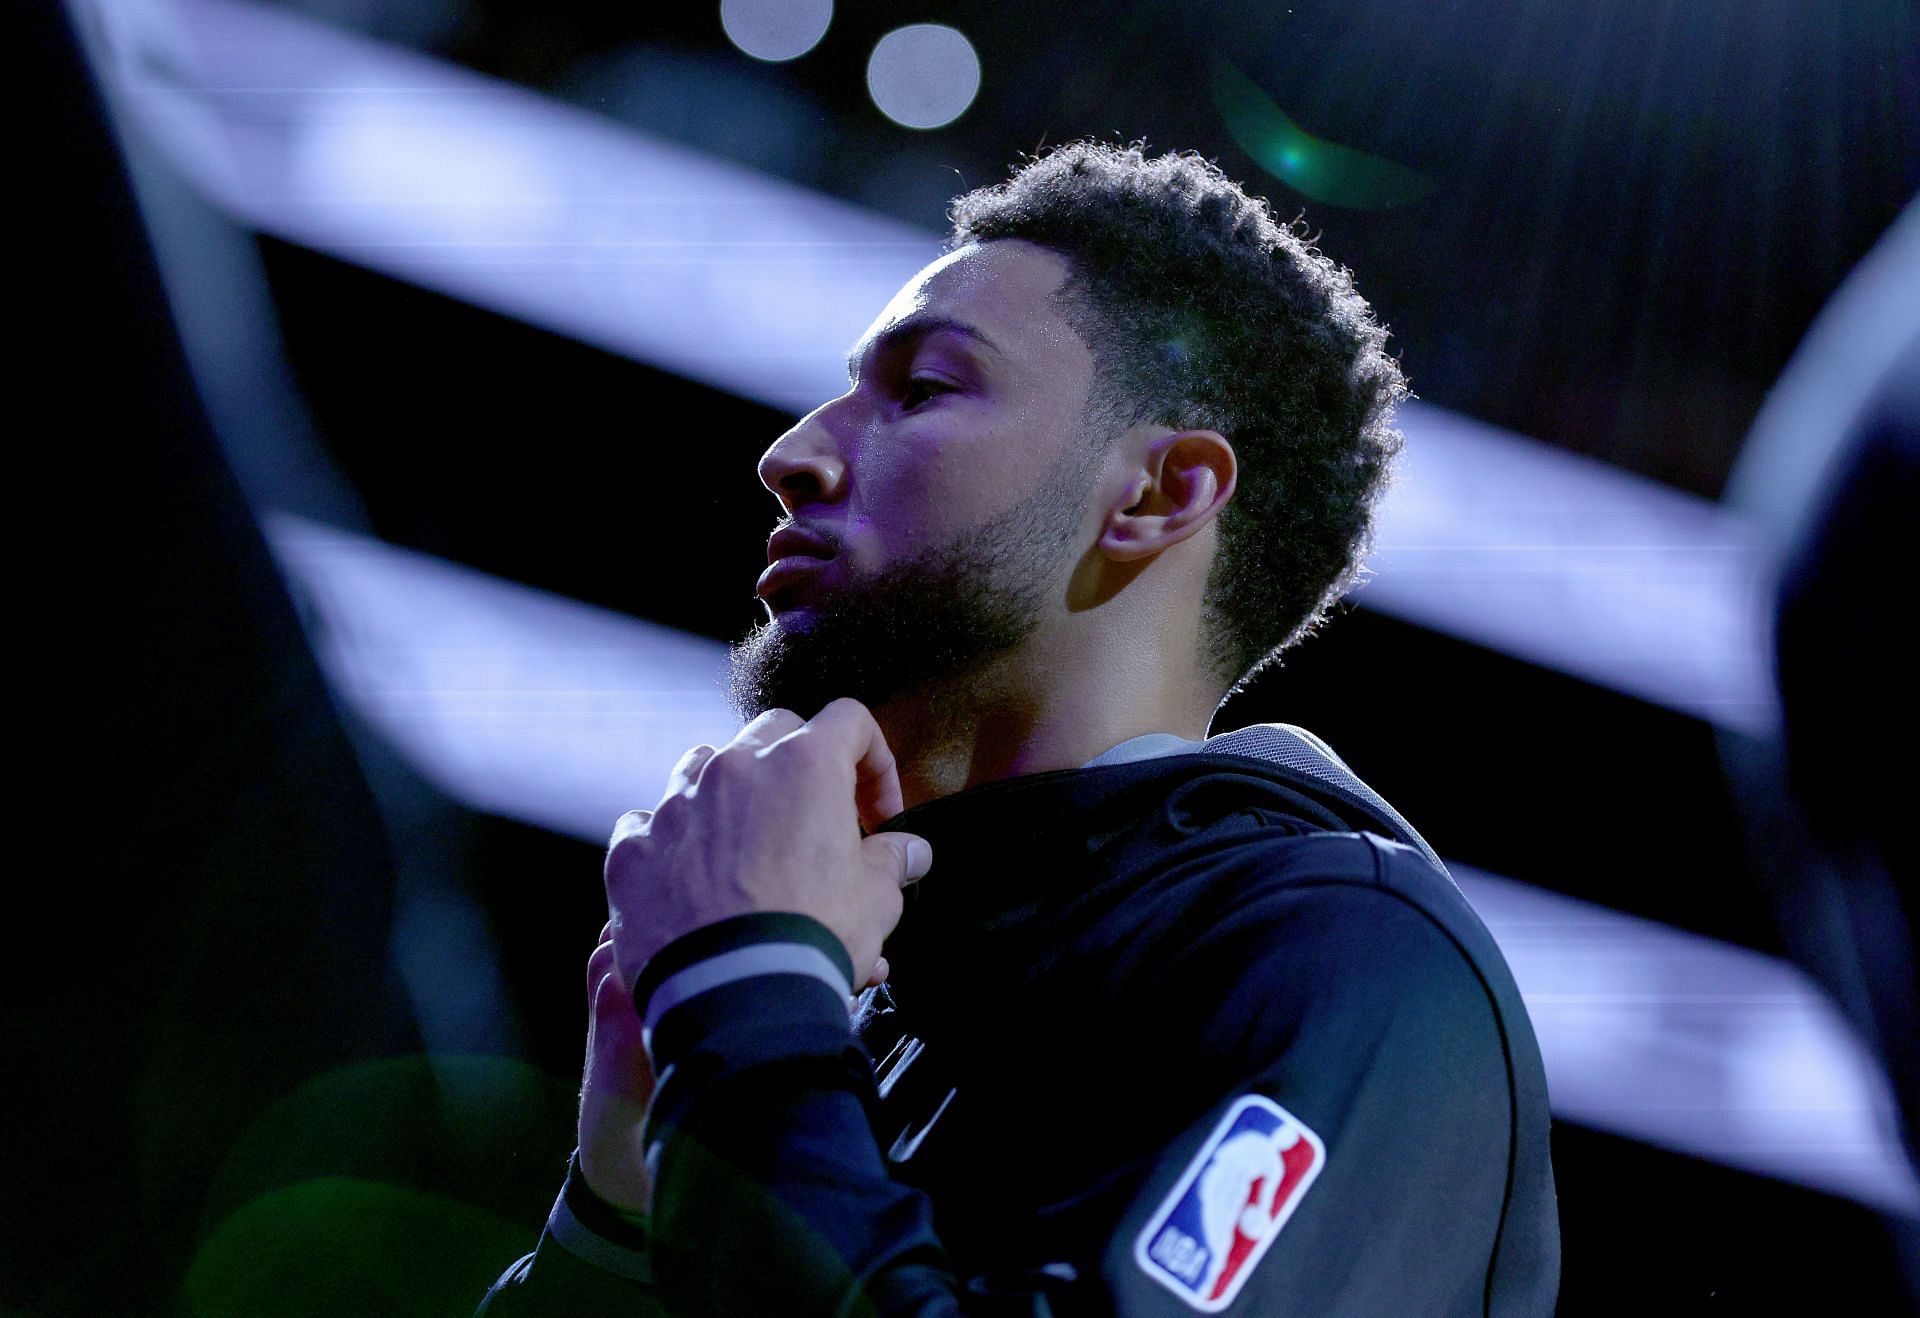 Ben Simmons Tried SNEAKING OUT OF BACK Of His Hotel But Angry